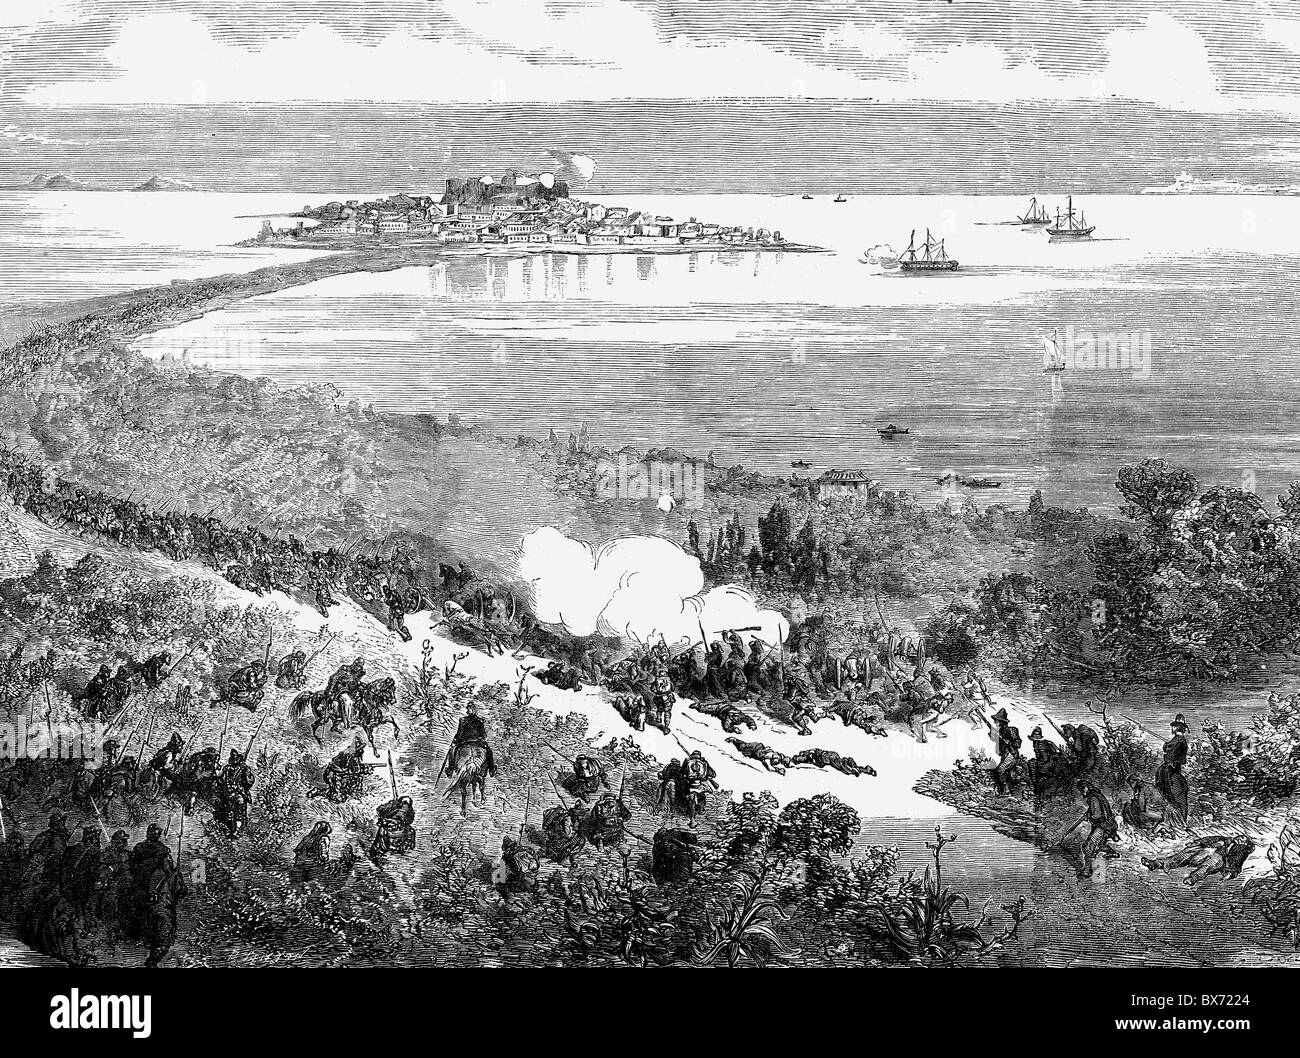 geography / travel, Italy, Risorgimento, Giuseppe Garibaldi's troops capture  Milazzo, 20.7.1860, contemporary wood engraving, Additional-Rights-Clearences-Not Available Stock Photo